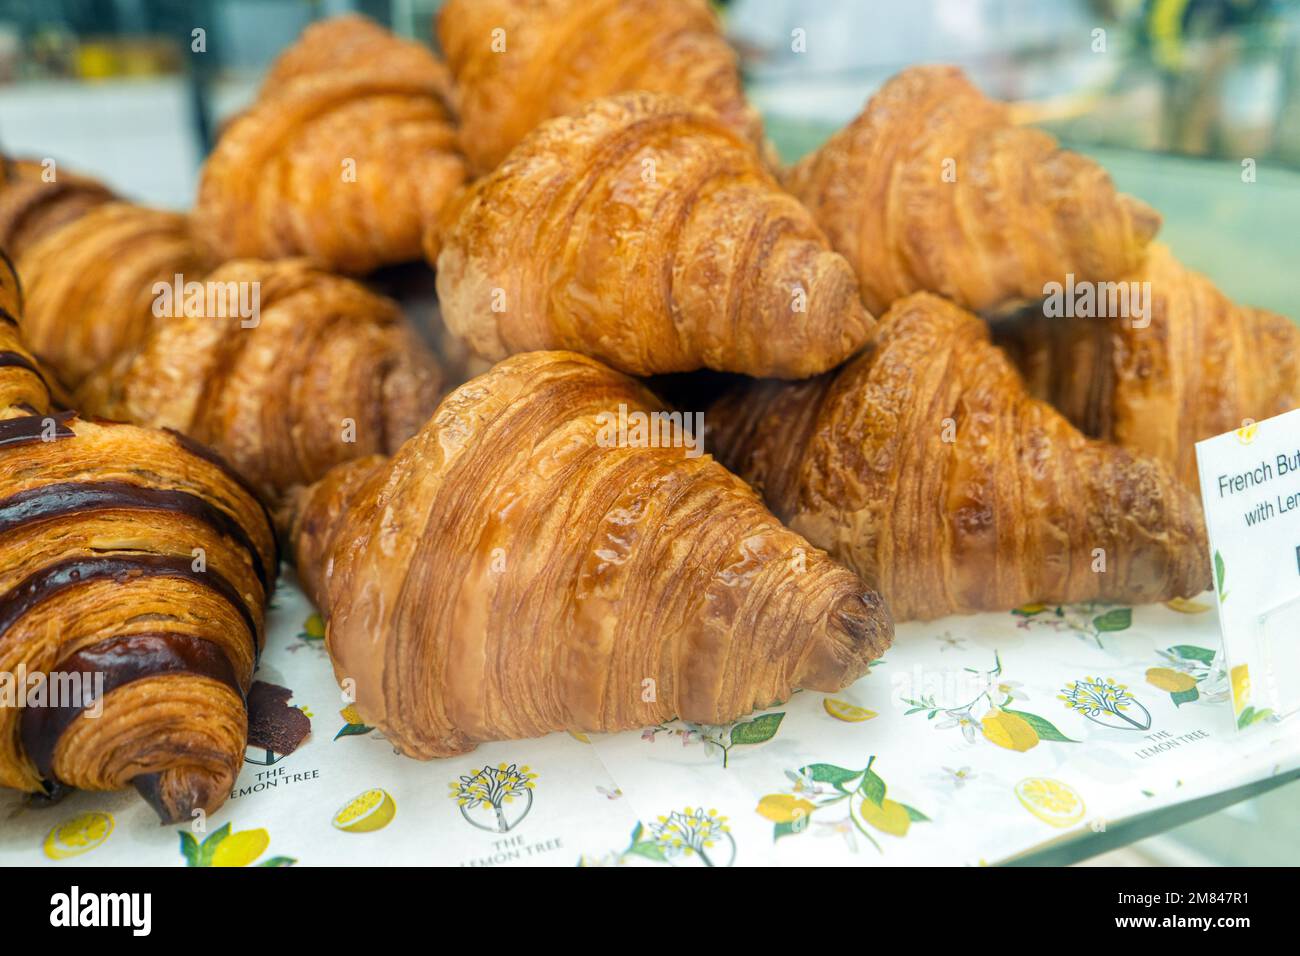 Kuala Lumpur, Malaysia - December 11th, Croissants and baked pastries on display at cafe. Stock Photo